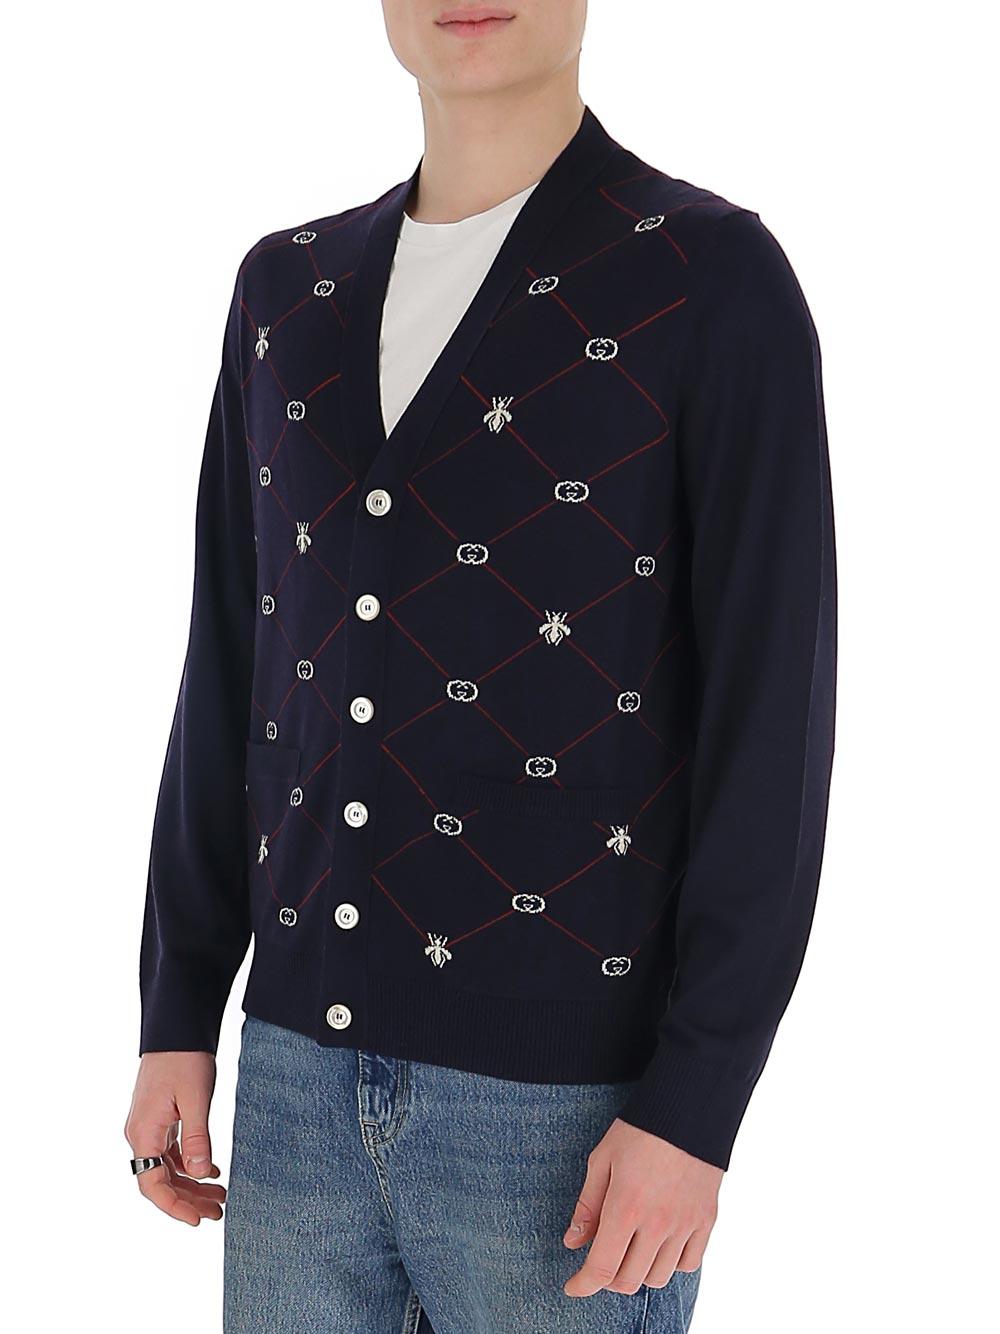 Gucci Wool GG Bees Jacquard Cardigan in Blue for Men - Lyst